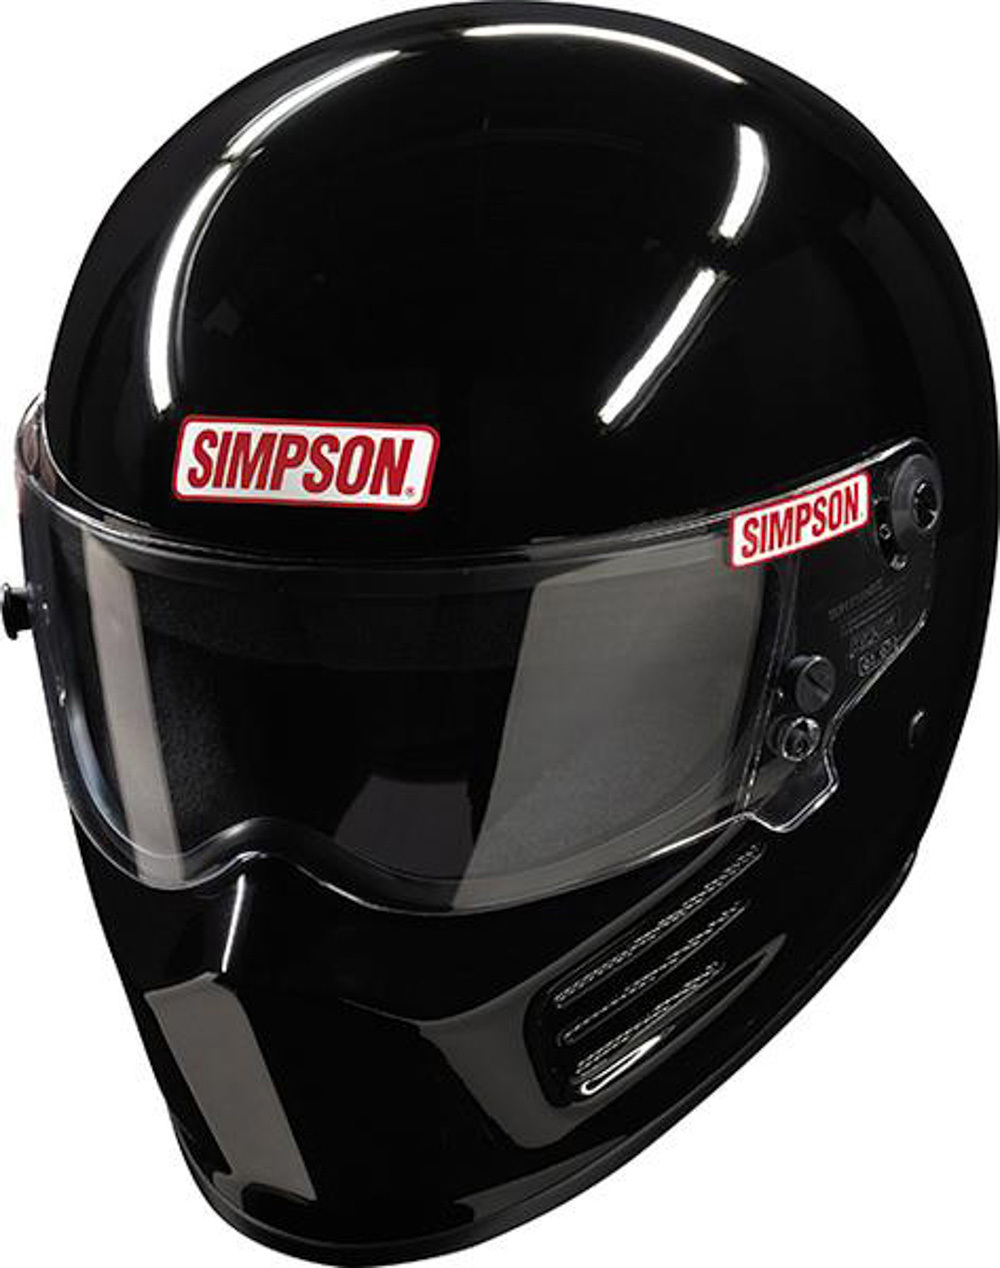 Simpson Safety 7200052 Helmet, Bandit, Snell SA2020, Head and Neck Support Ready, Black, 2X-Large, Each